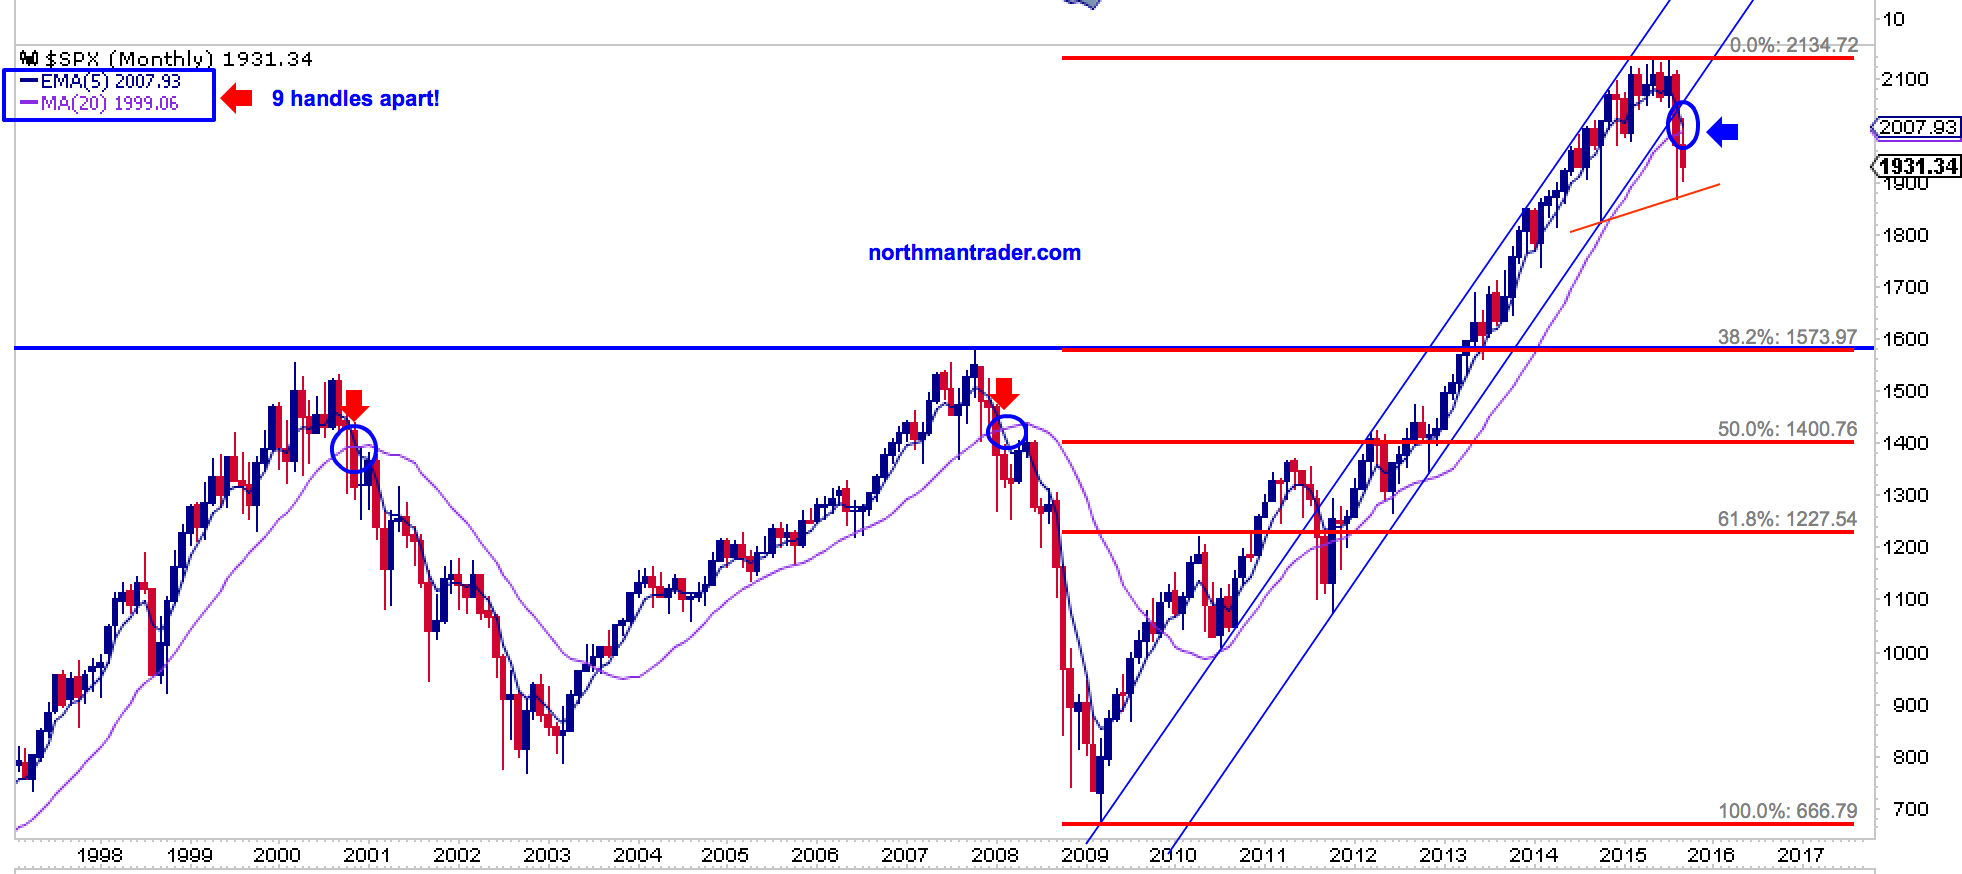 SPX Monthly 1997-2015